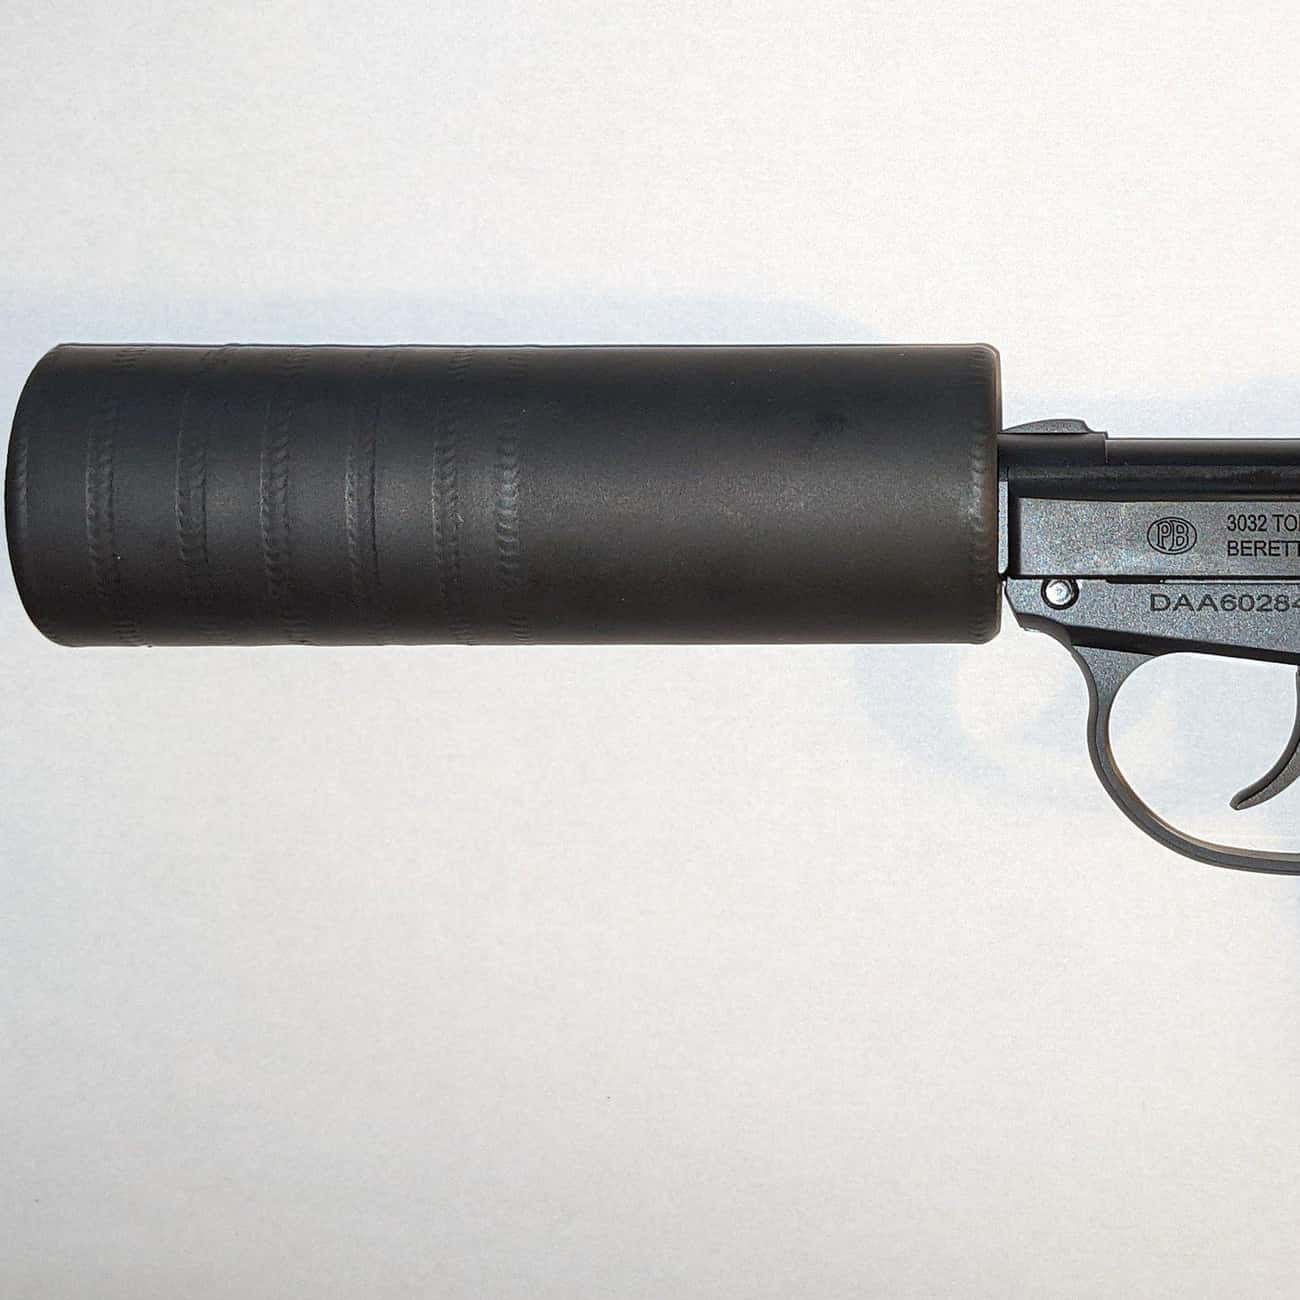 Silencers Completely Negate The Sounds Of Gunfire